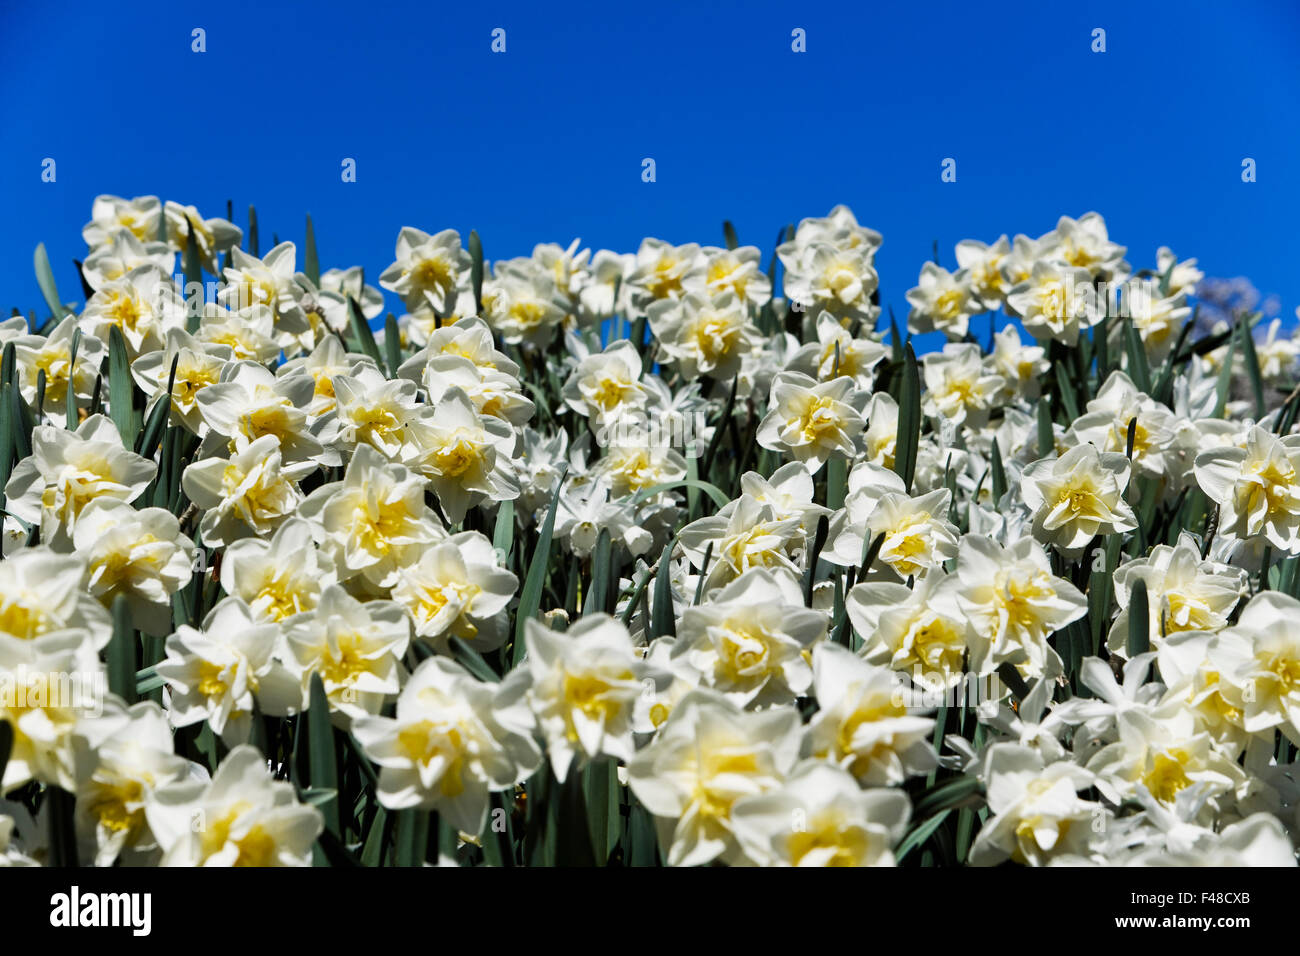 White narcissuses against a blue sky, Sweden. Stock Photo